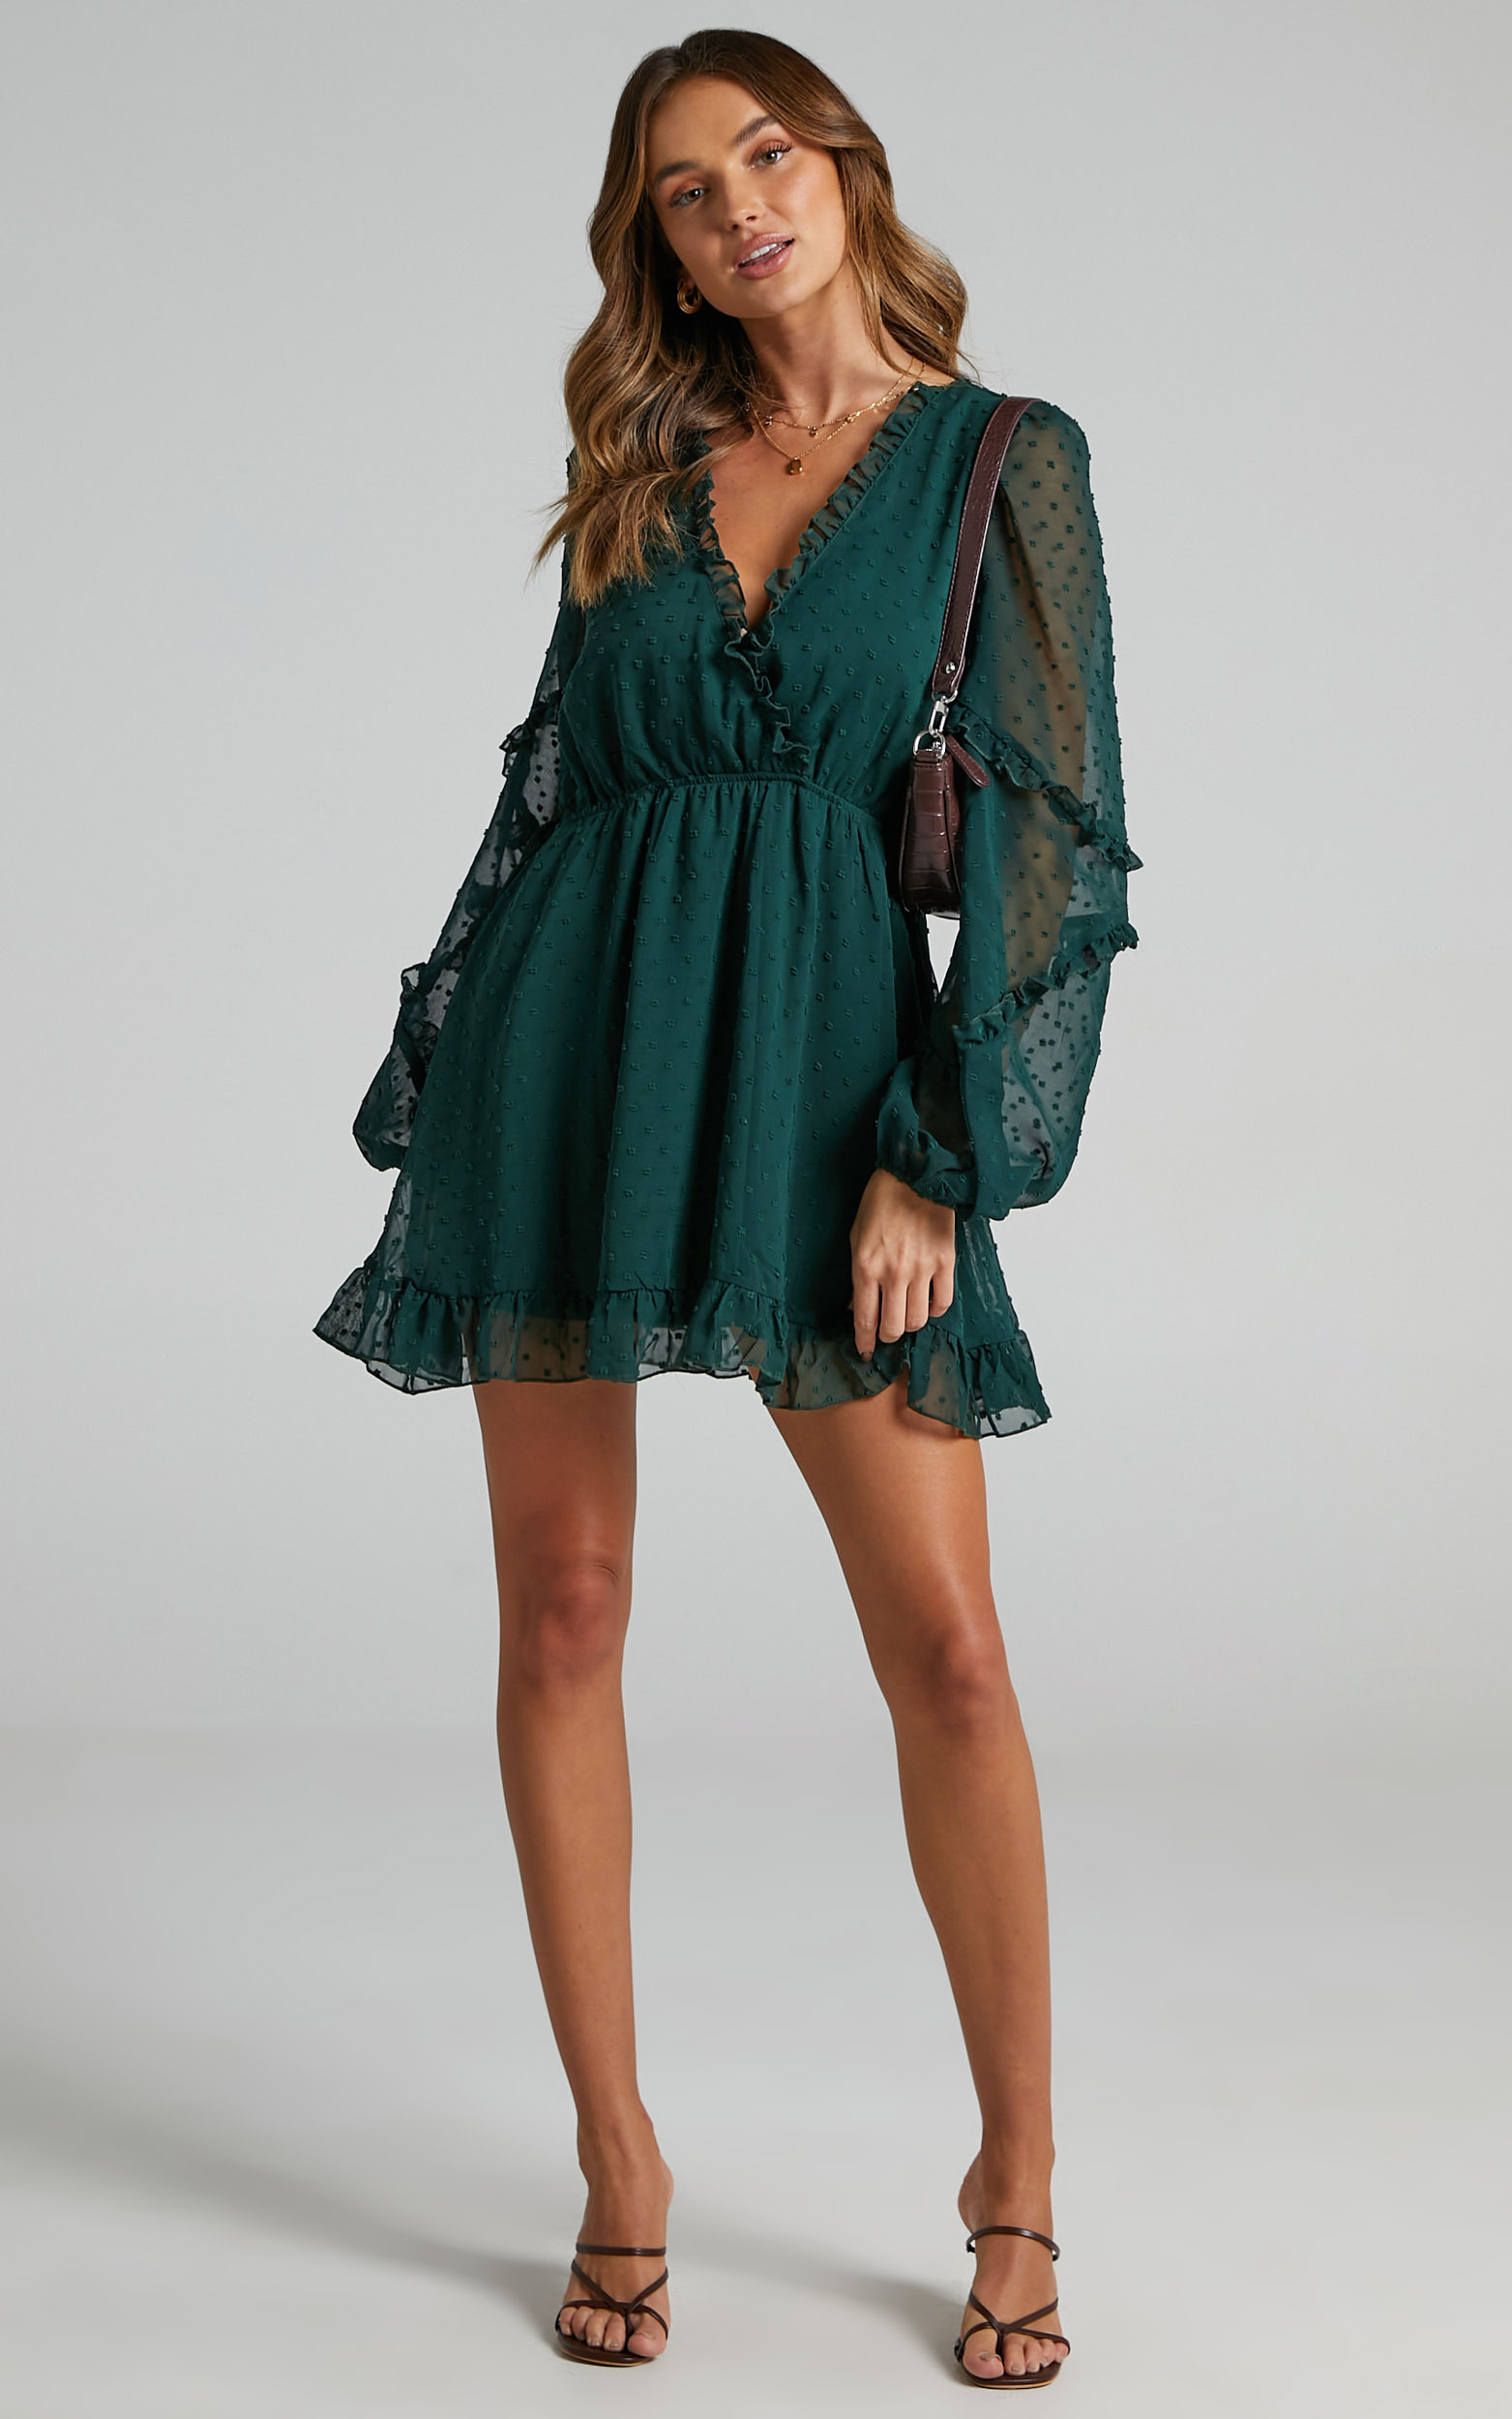 Sancha Long Sleeve Frill Mini Dress in Emerald - 06, GRN3, hi-res image number null